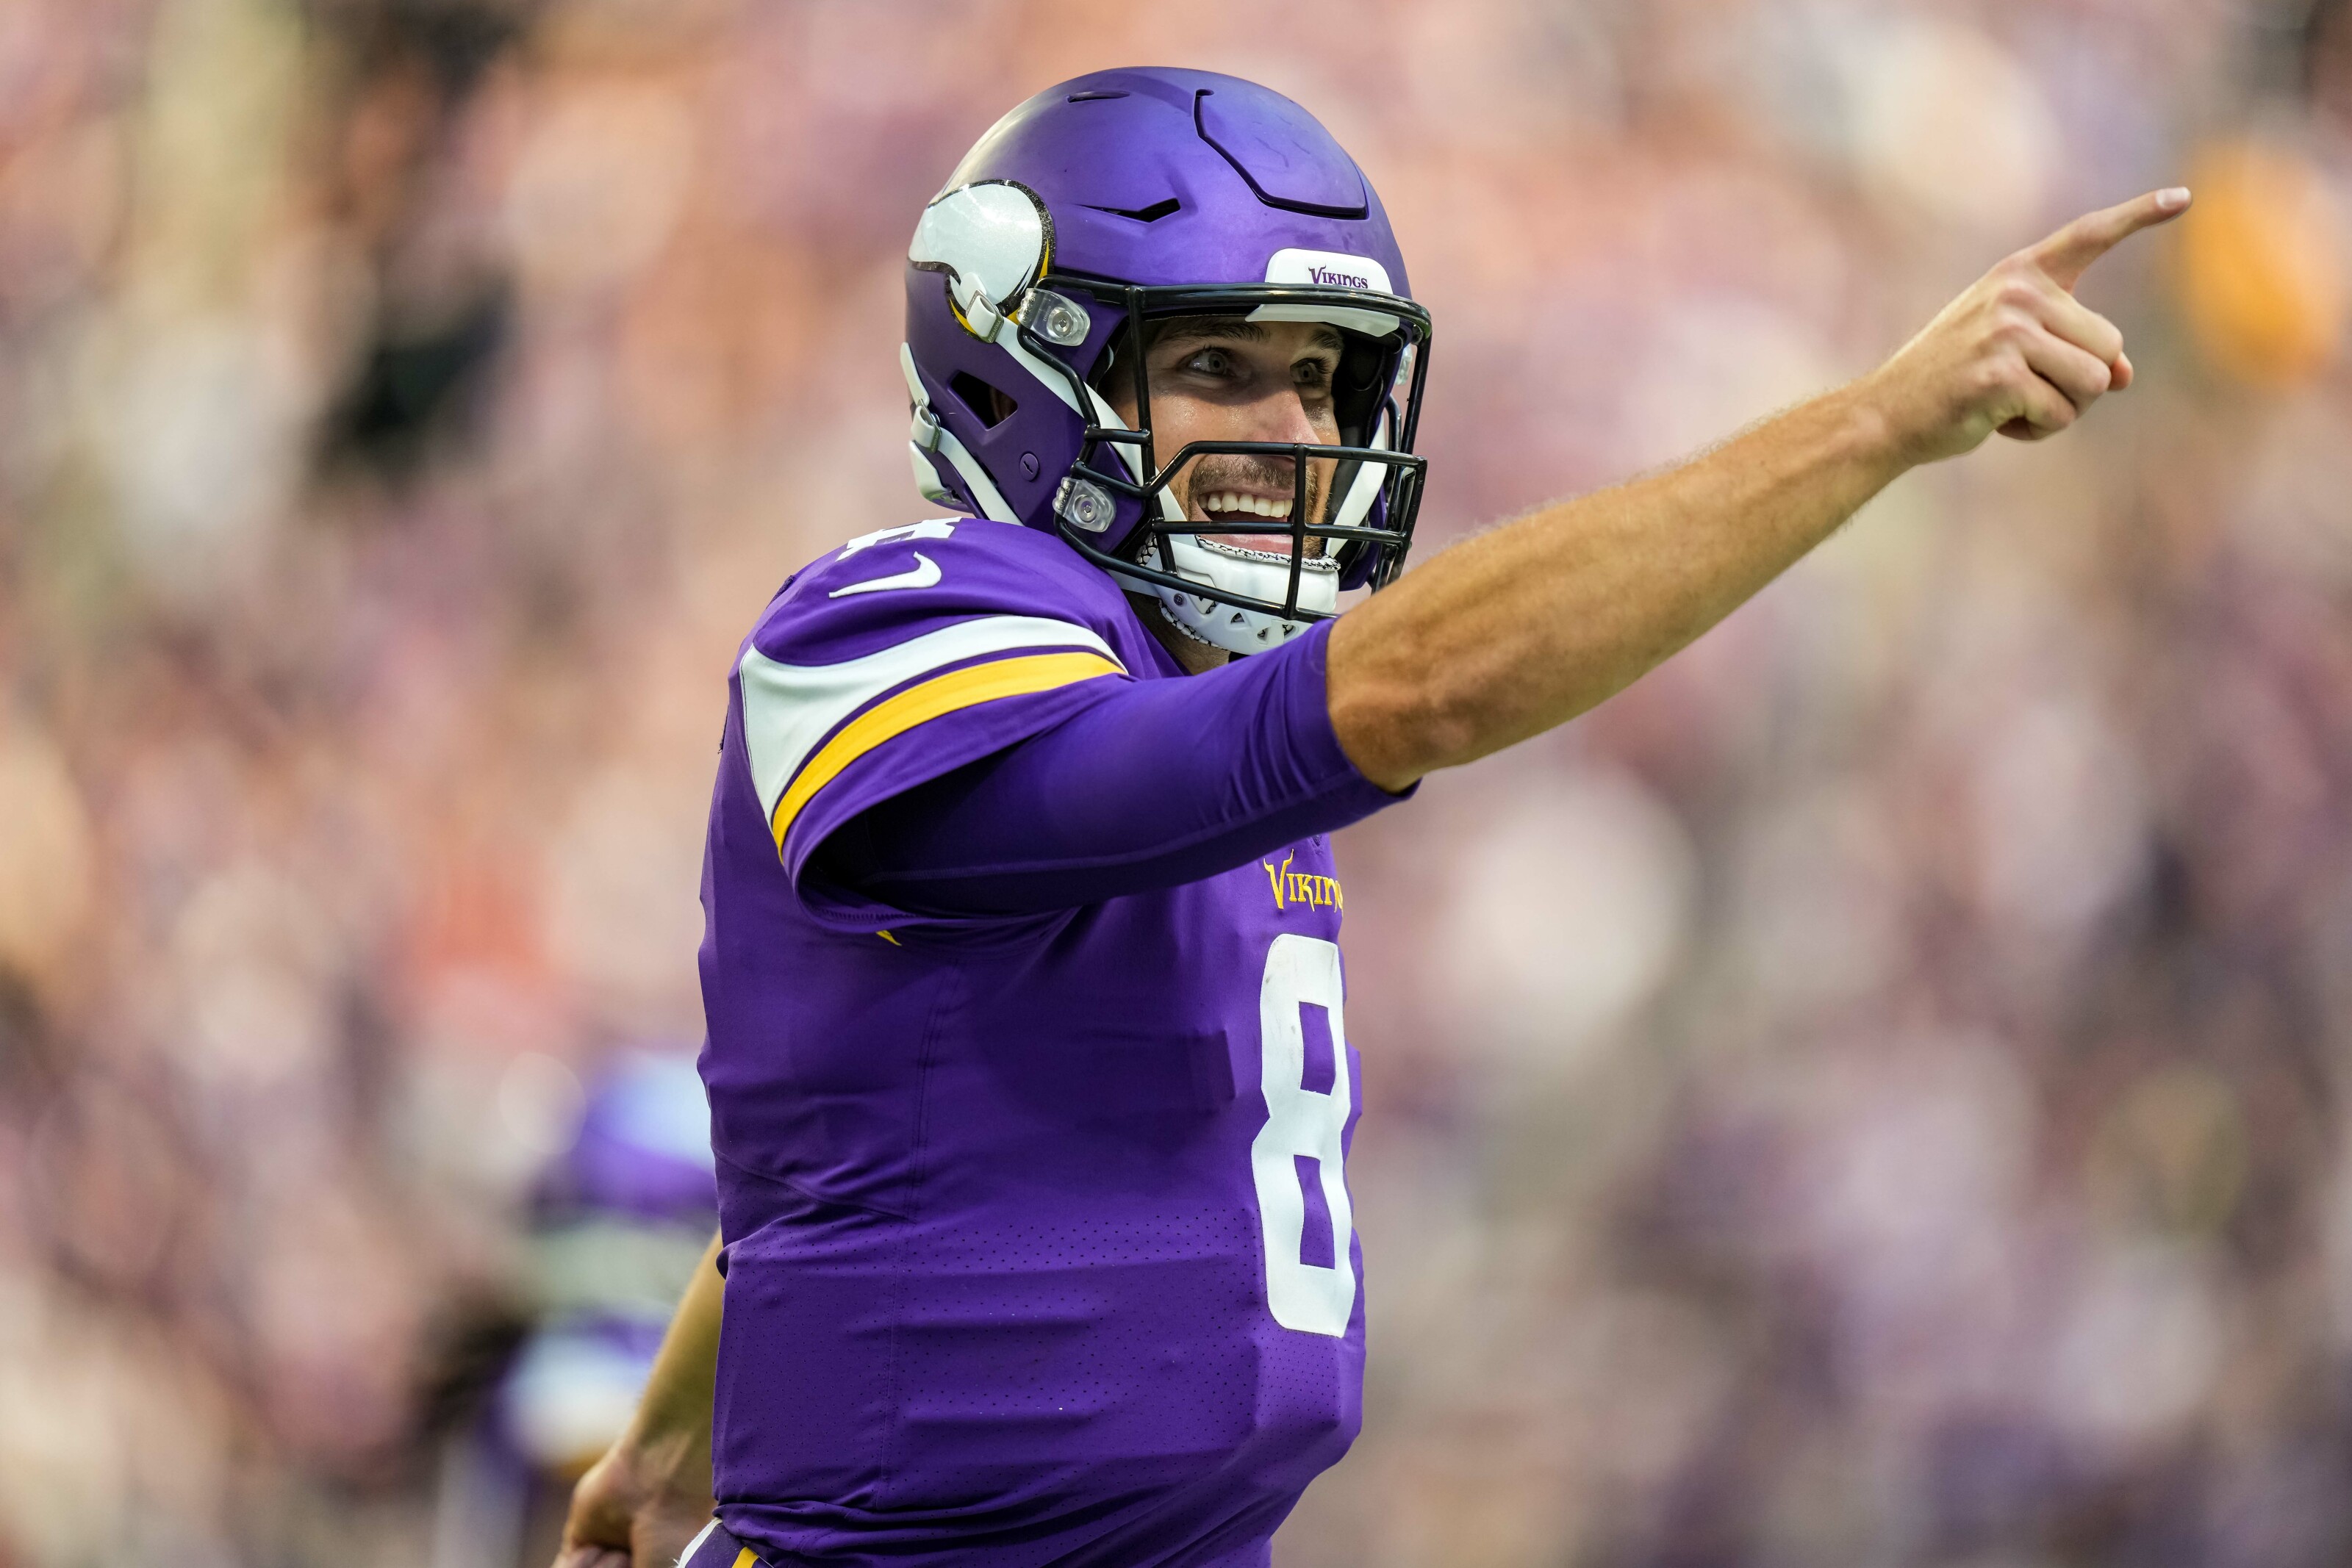 Detroit Lions vs. Vikings: Week 5 betting odds, spread, and prediction